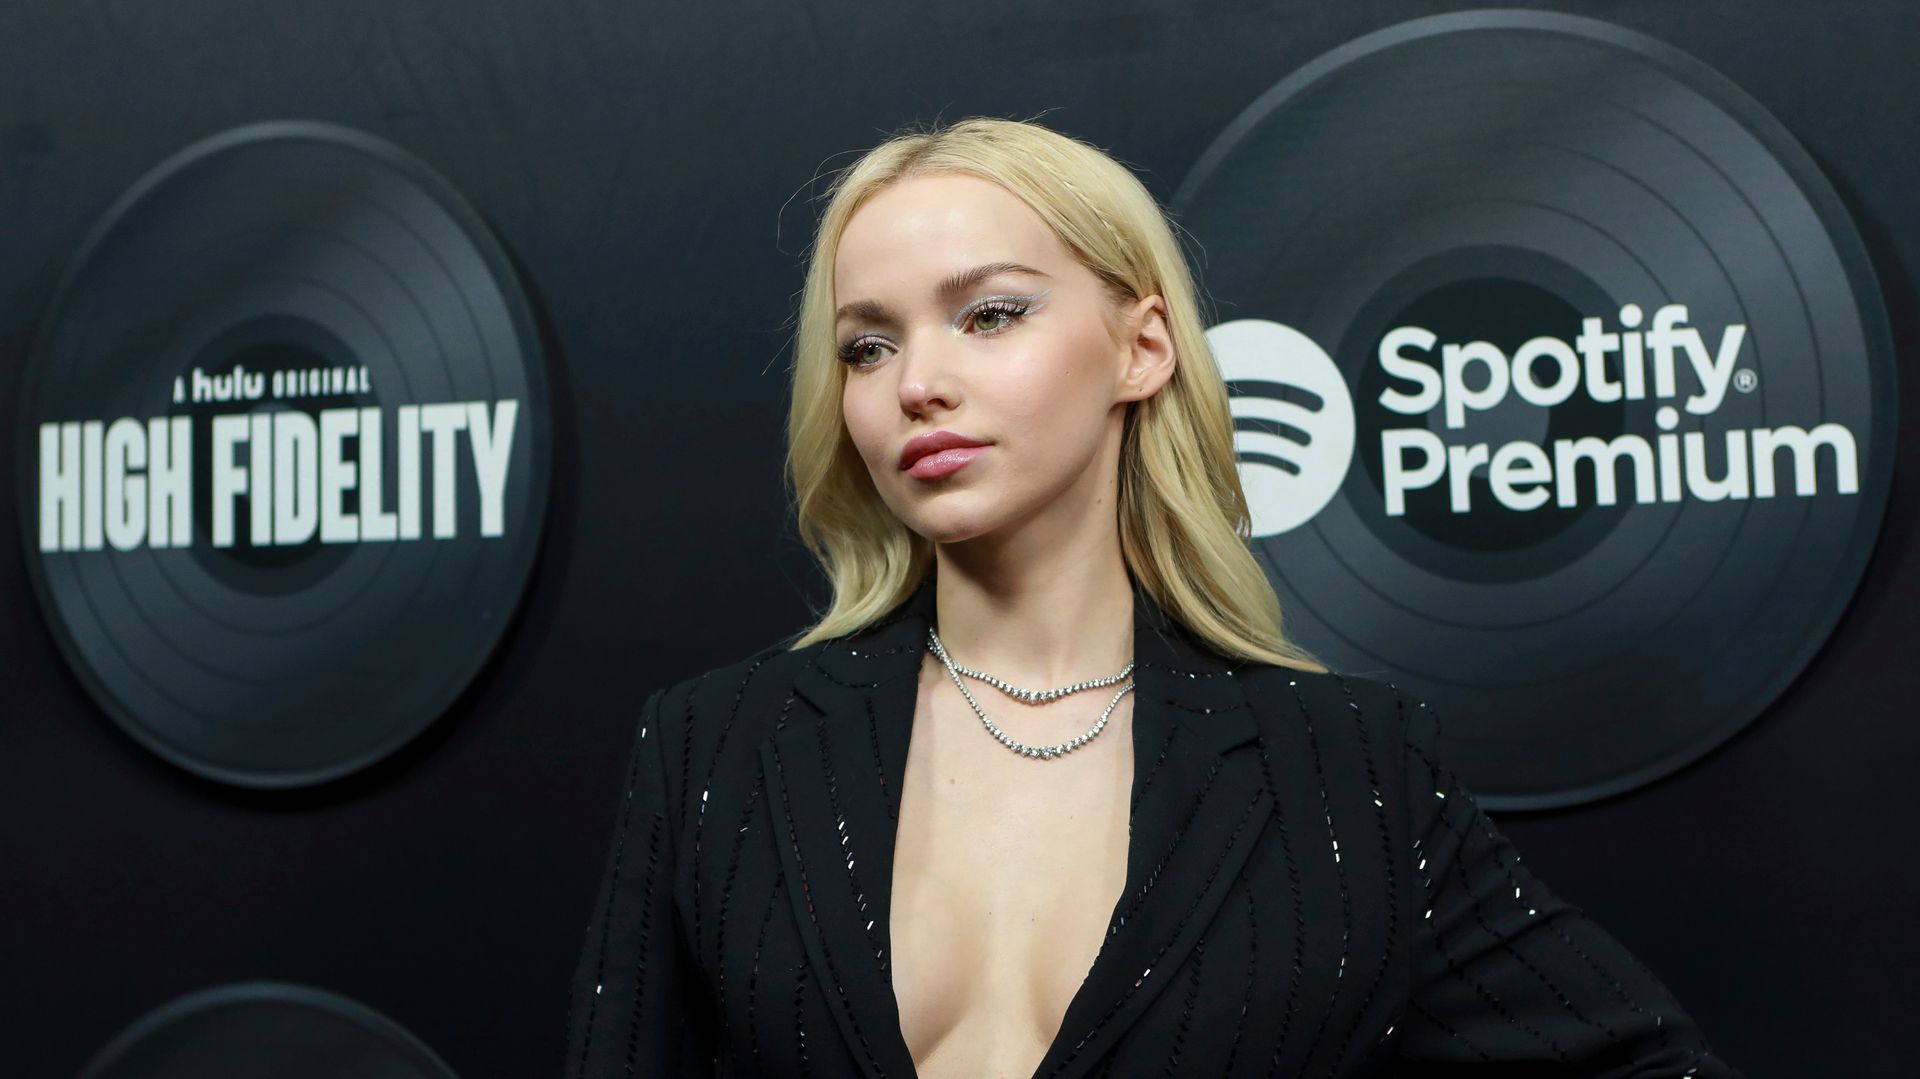 Dove Cameron Attends the Hulu’s High Fidelity Premiere (81 Photos)